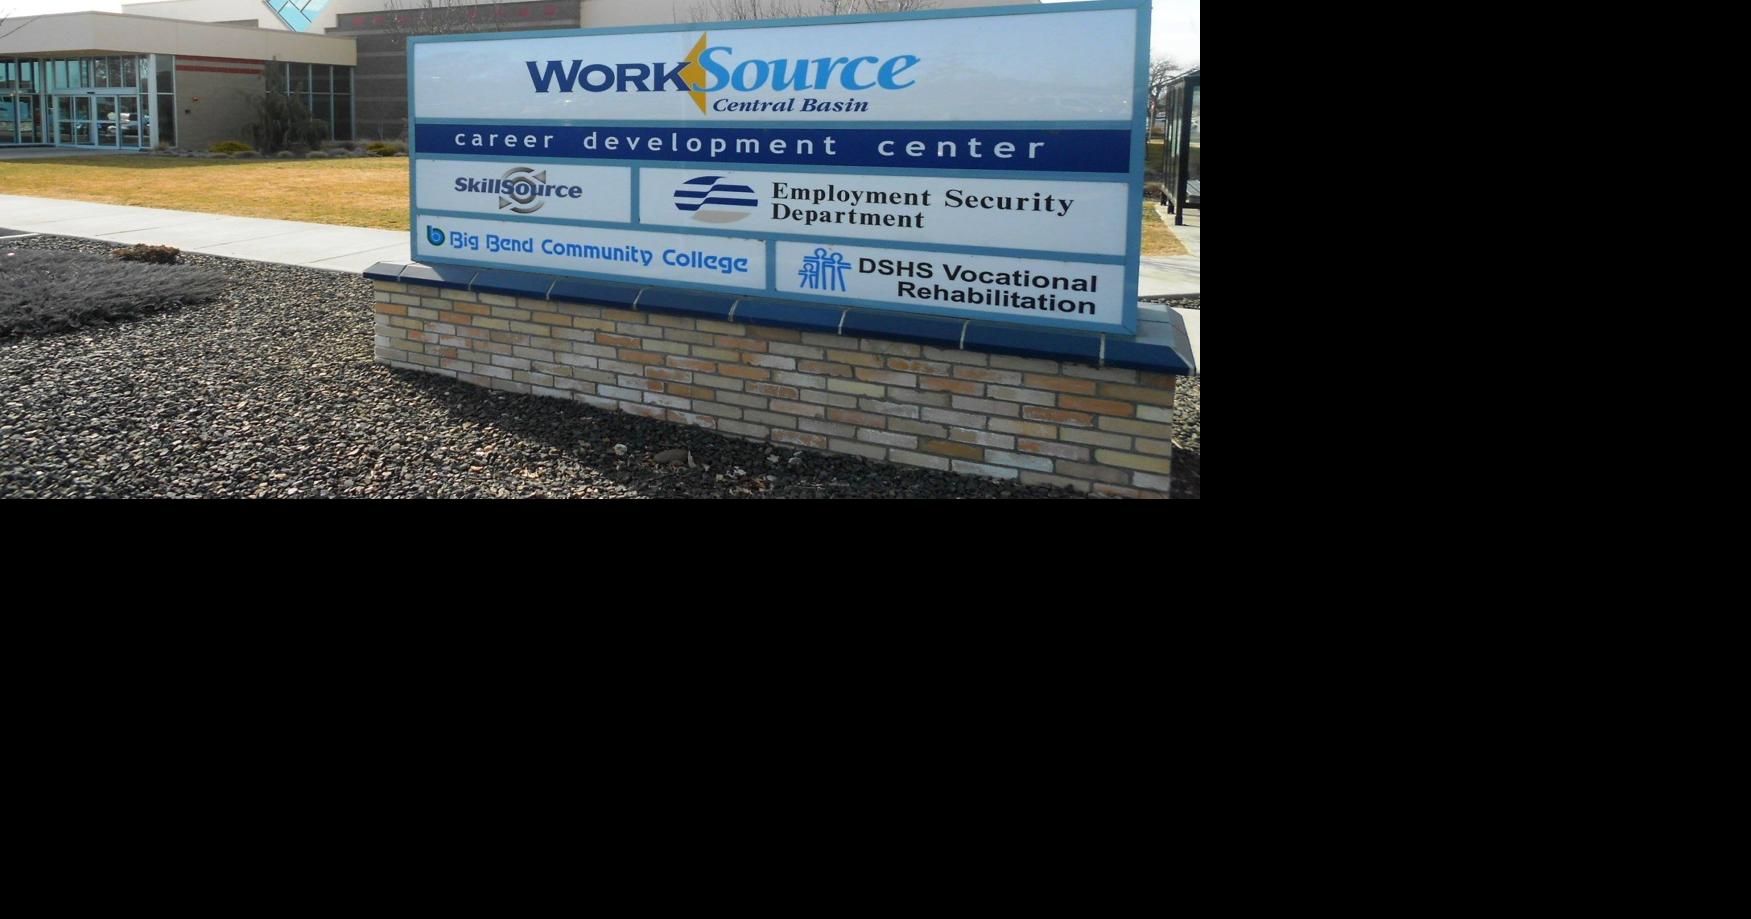 WorkSource holding annual fall hiring event Oct. 13 in Moses Lake